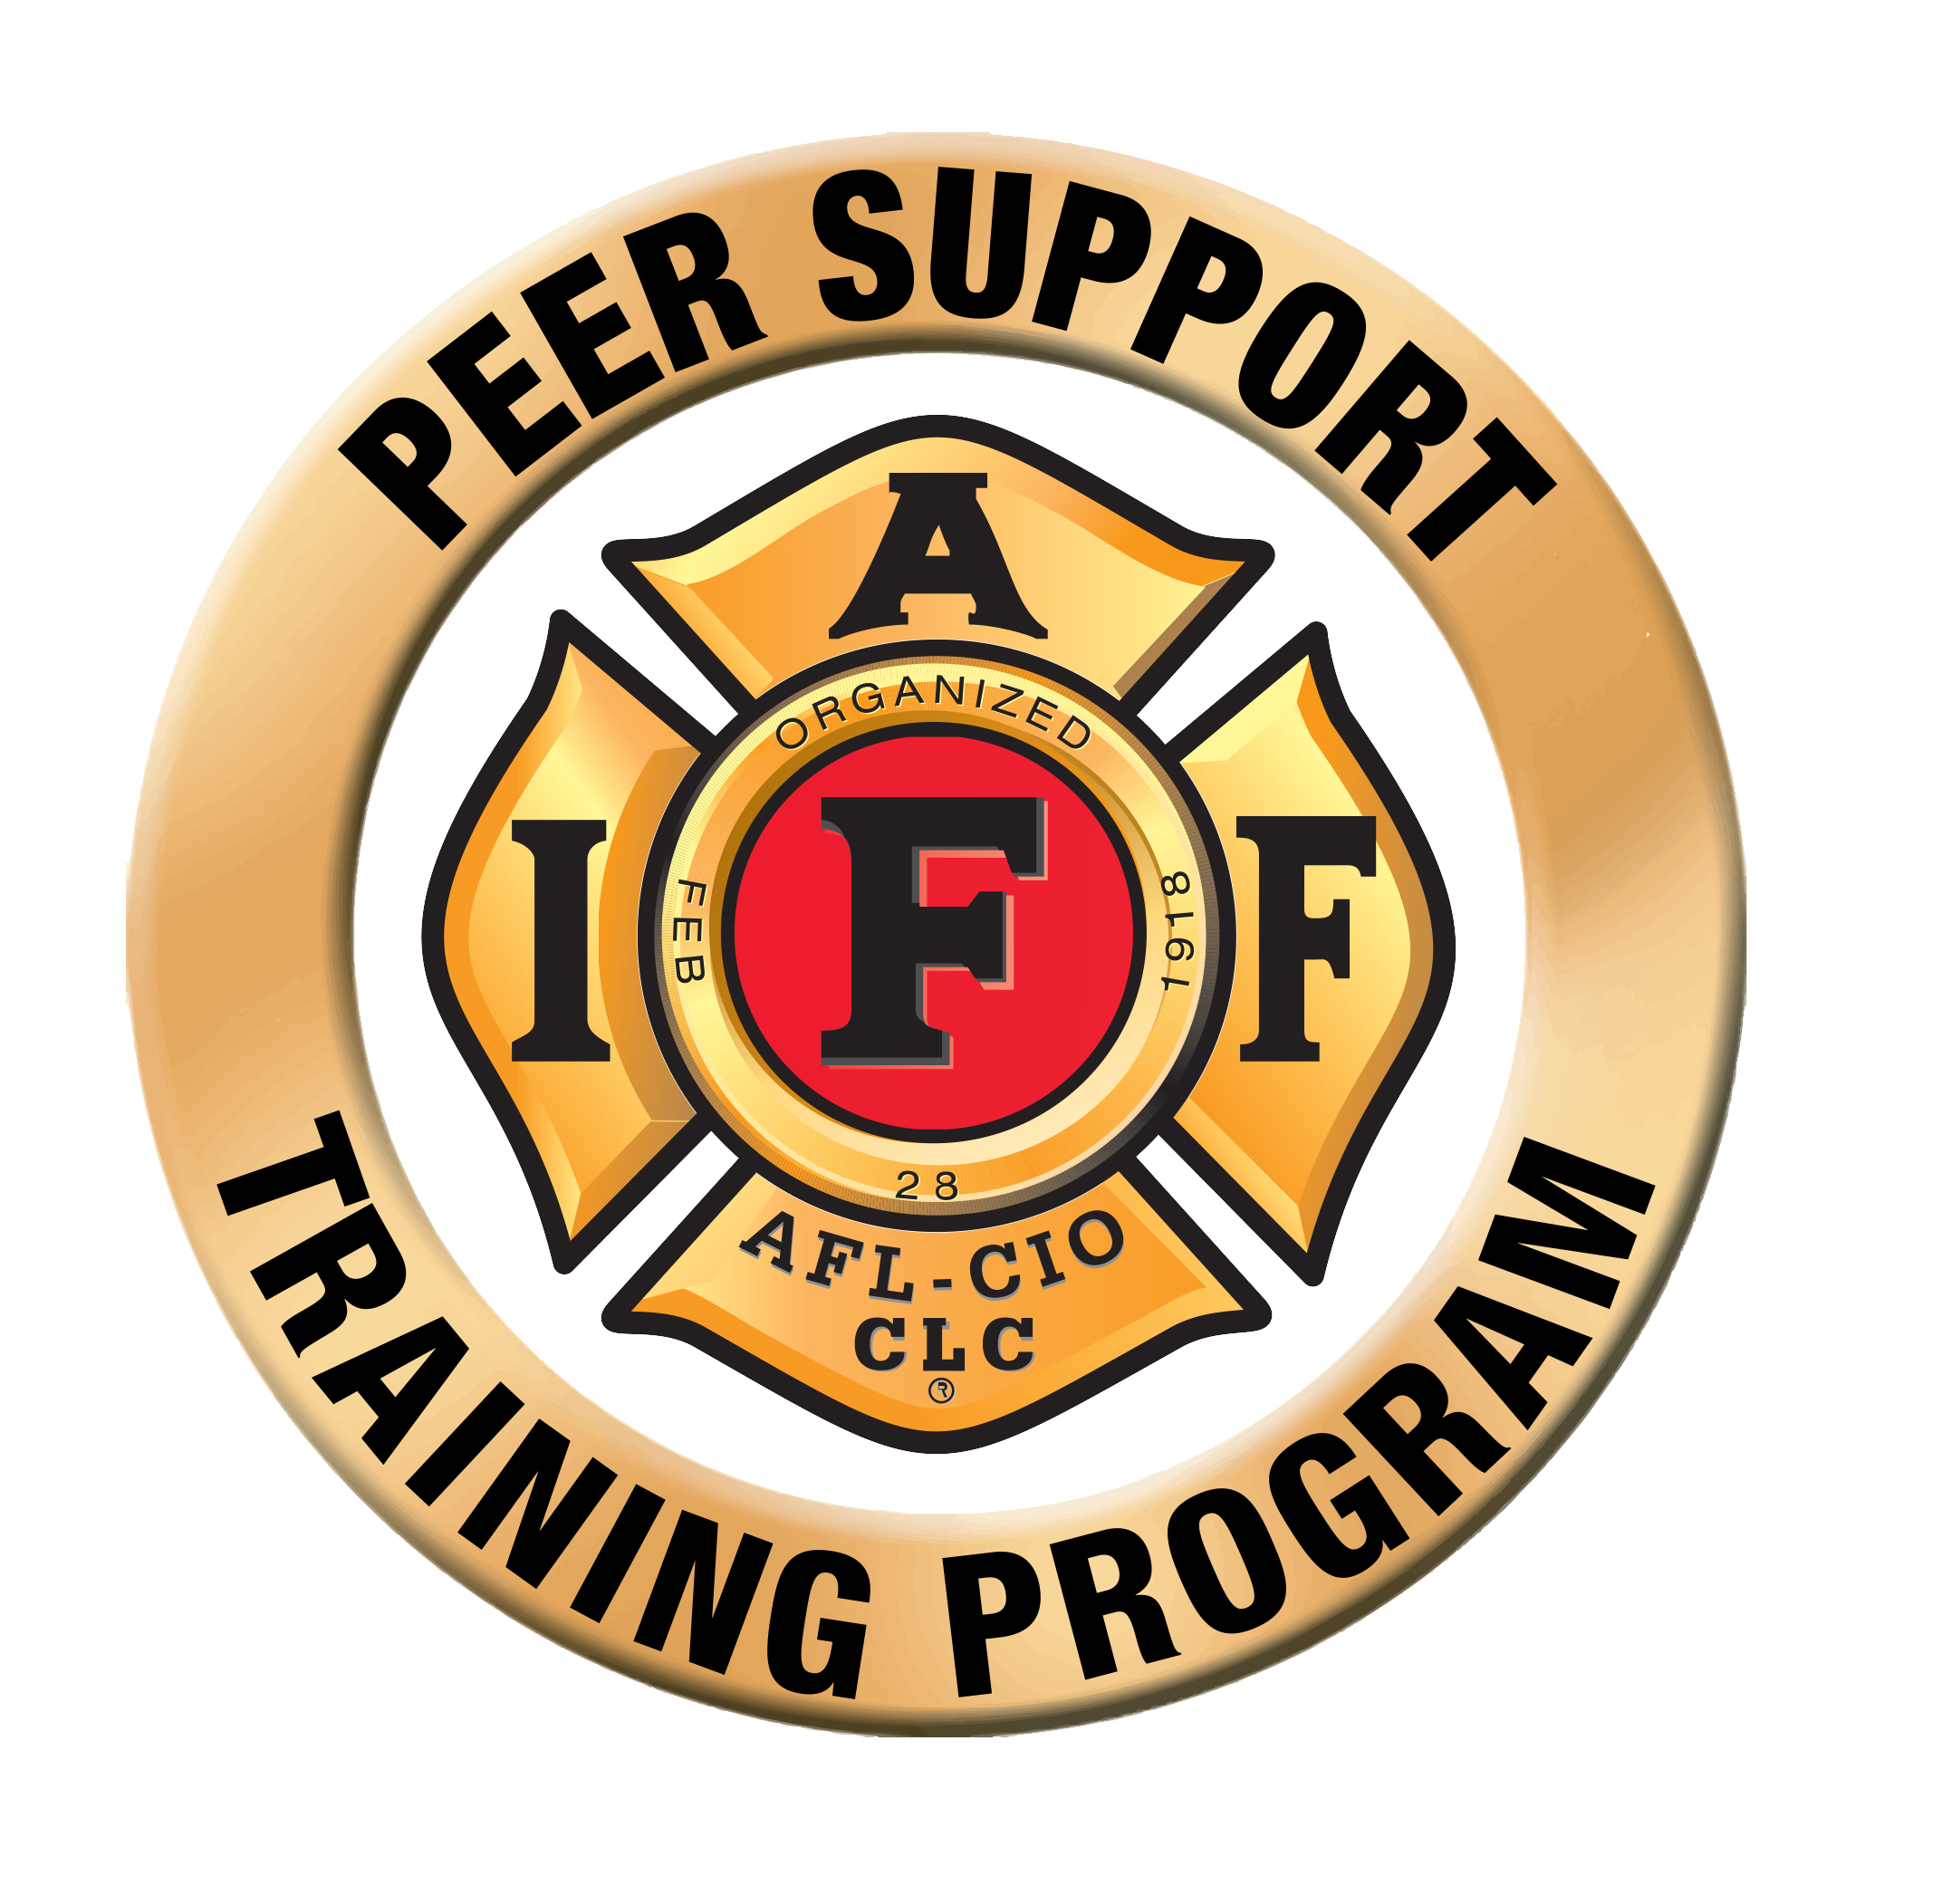 Display event - SMPFF Local 152 Peer Support Training Aug. 22-23, 2023